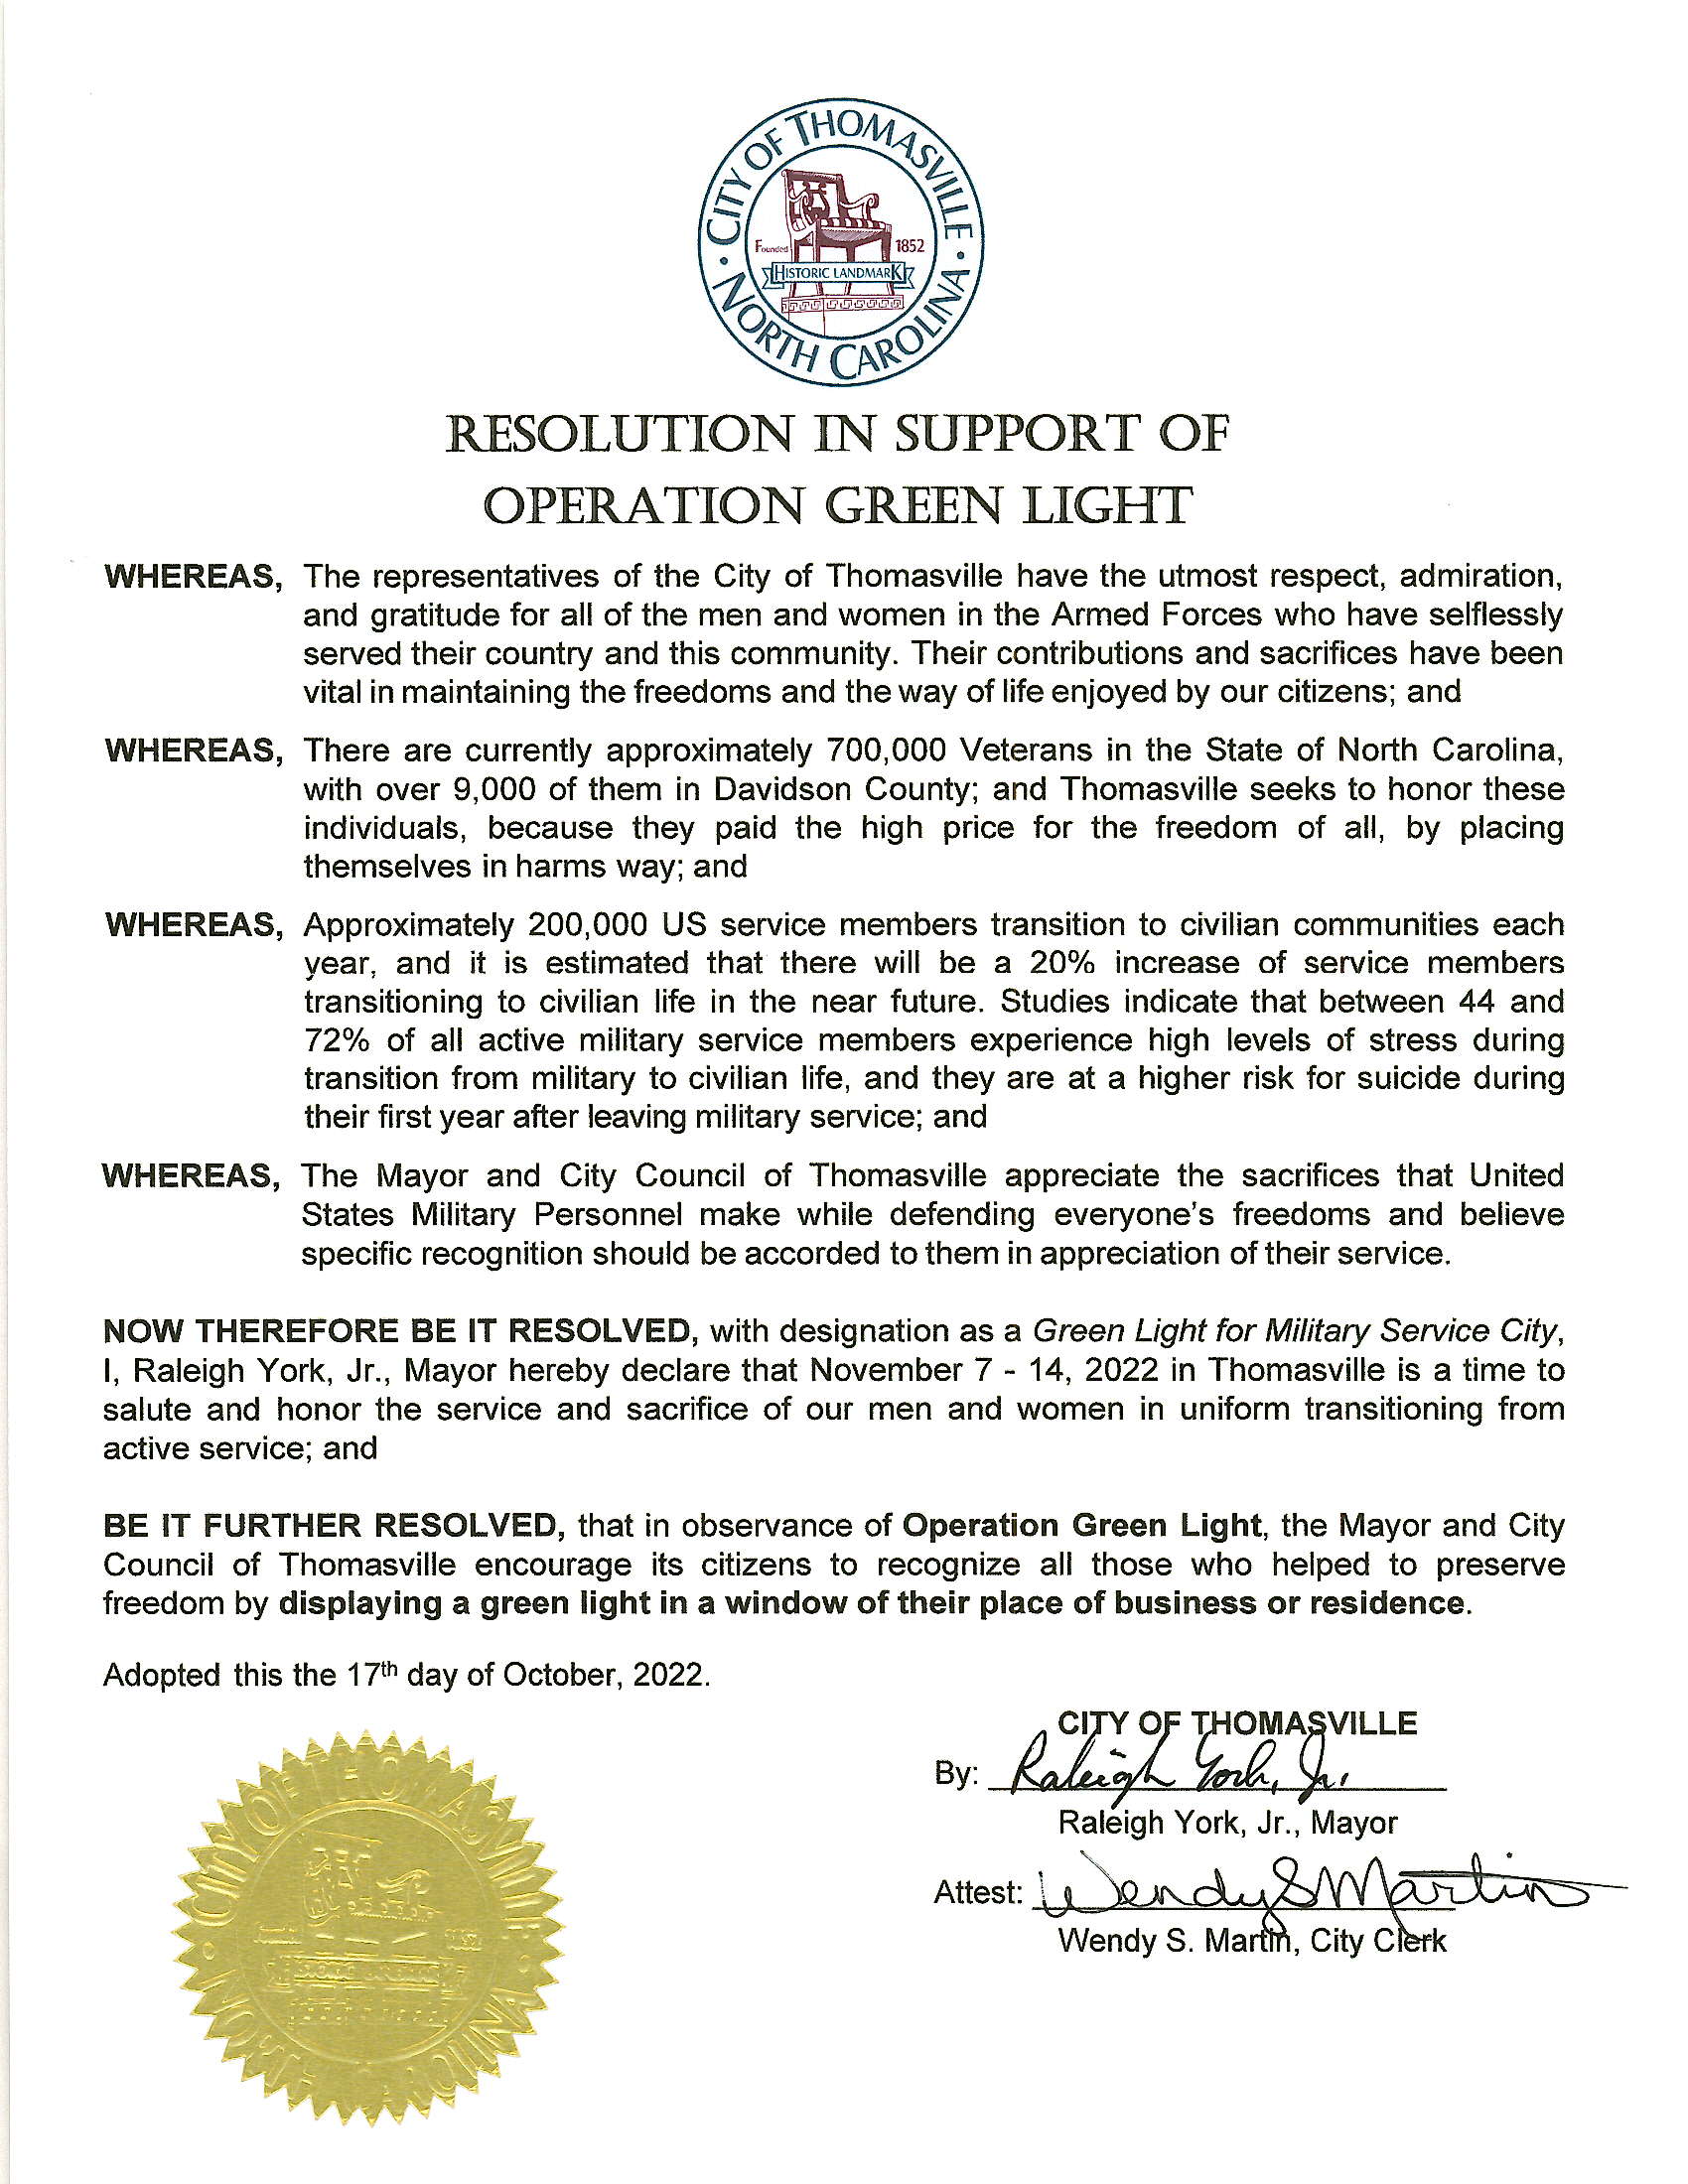 Resolution in Support of Operation Green Light